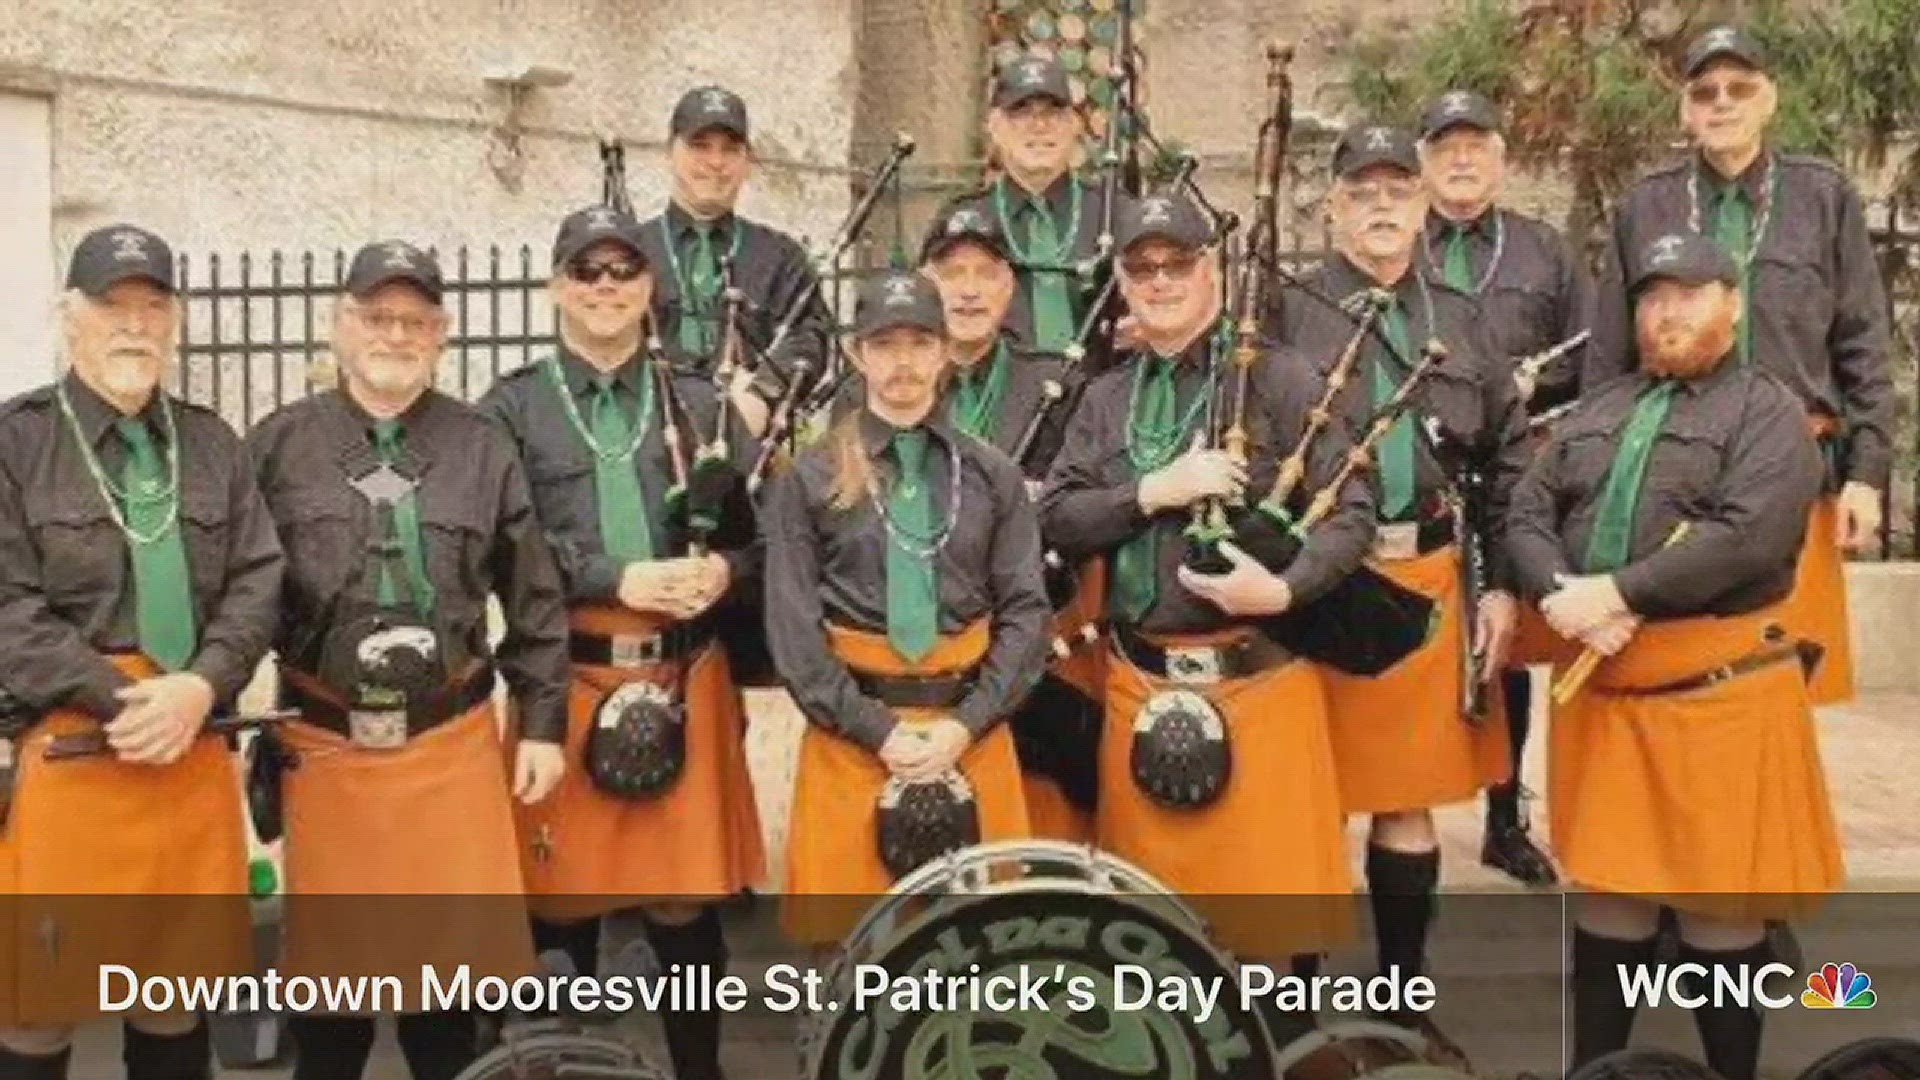 From an early St. Patrick's day celebration to the wizarding world of Harry Potter, there's something for everyone this weekend in and out of the Queen City.